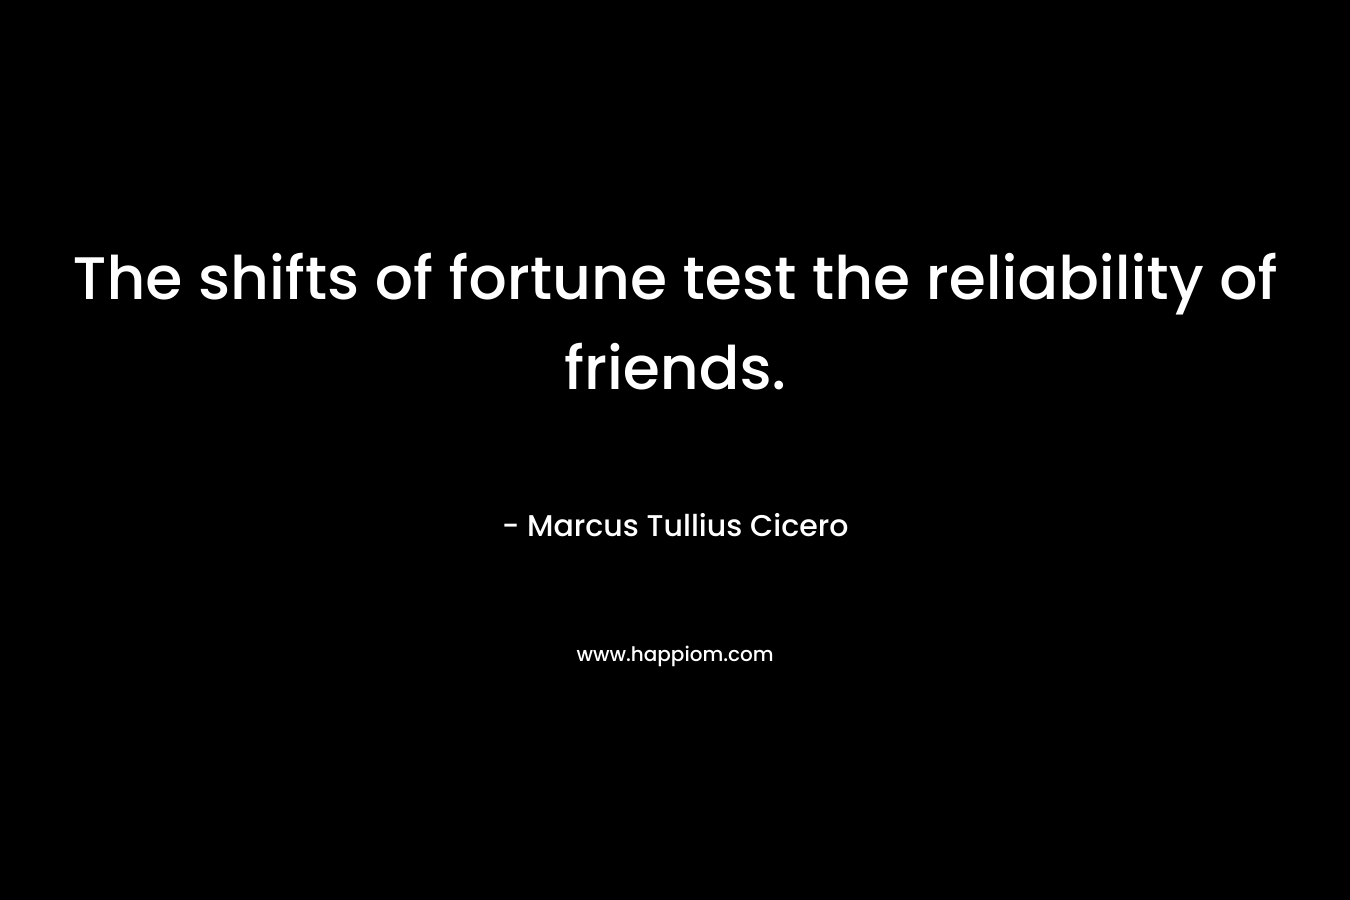 The shifts of fortune test the reliability of friends.